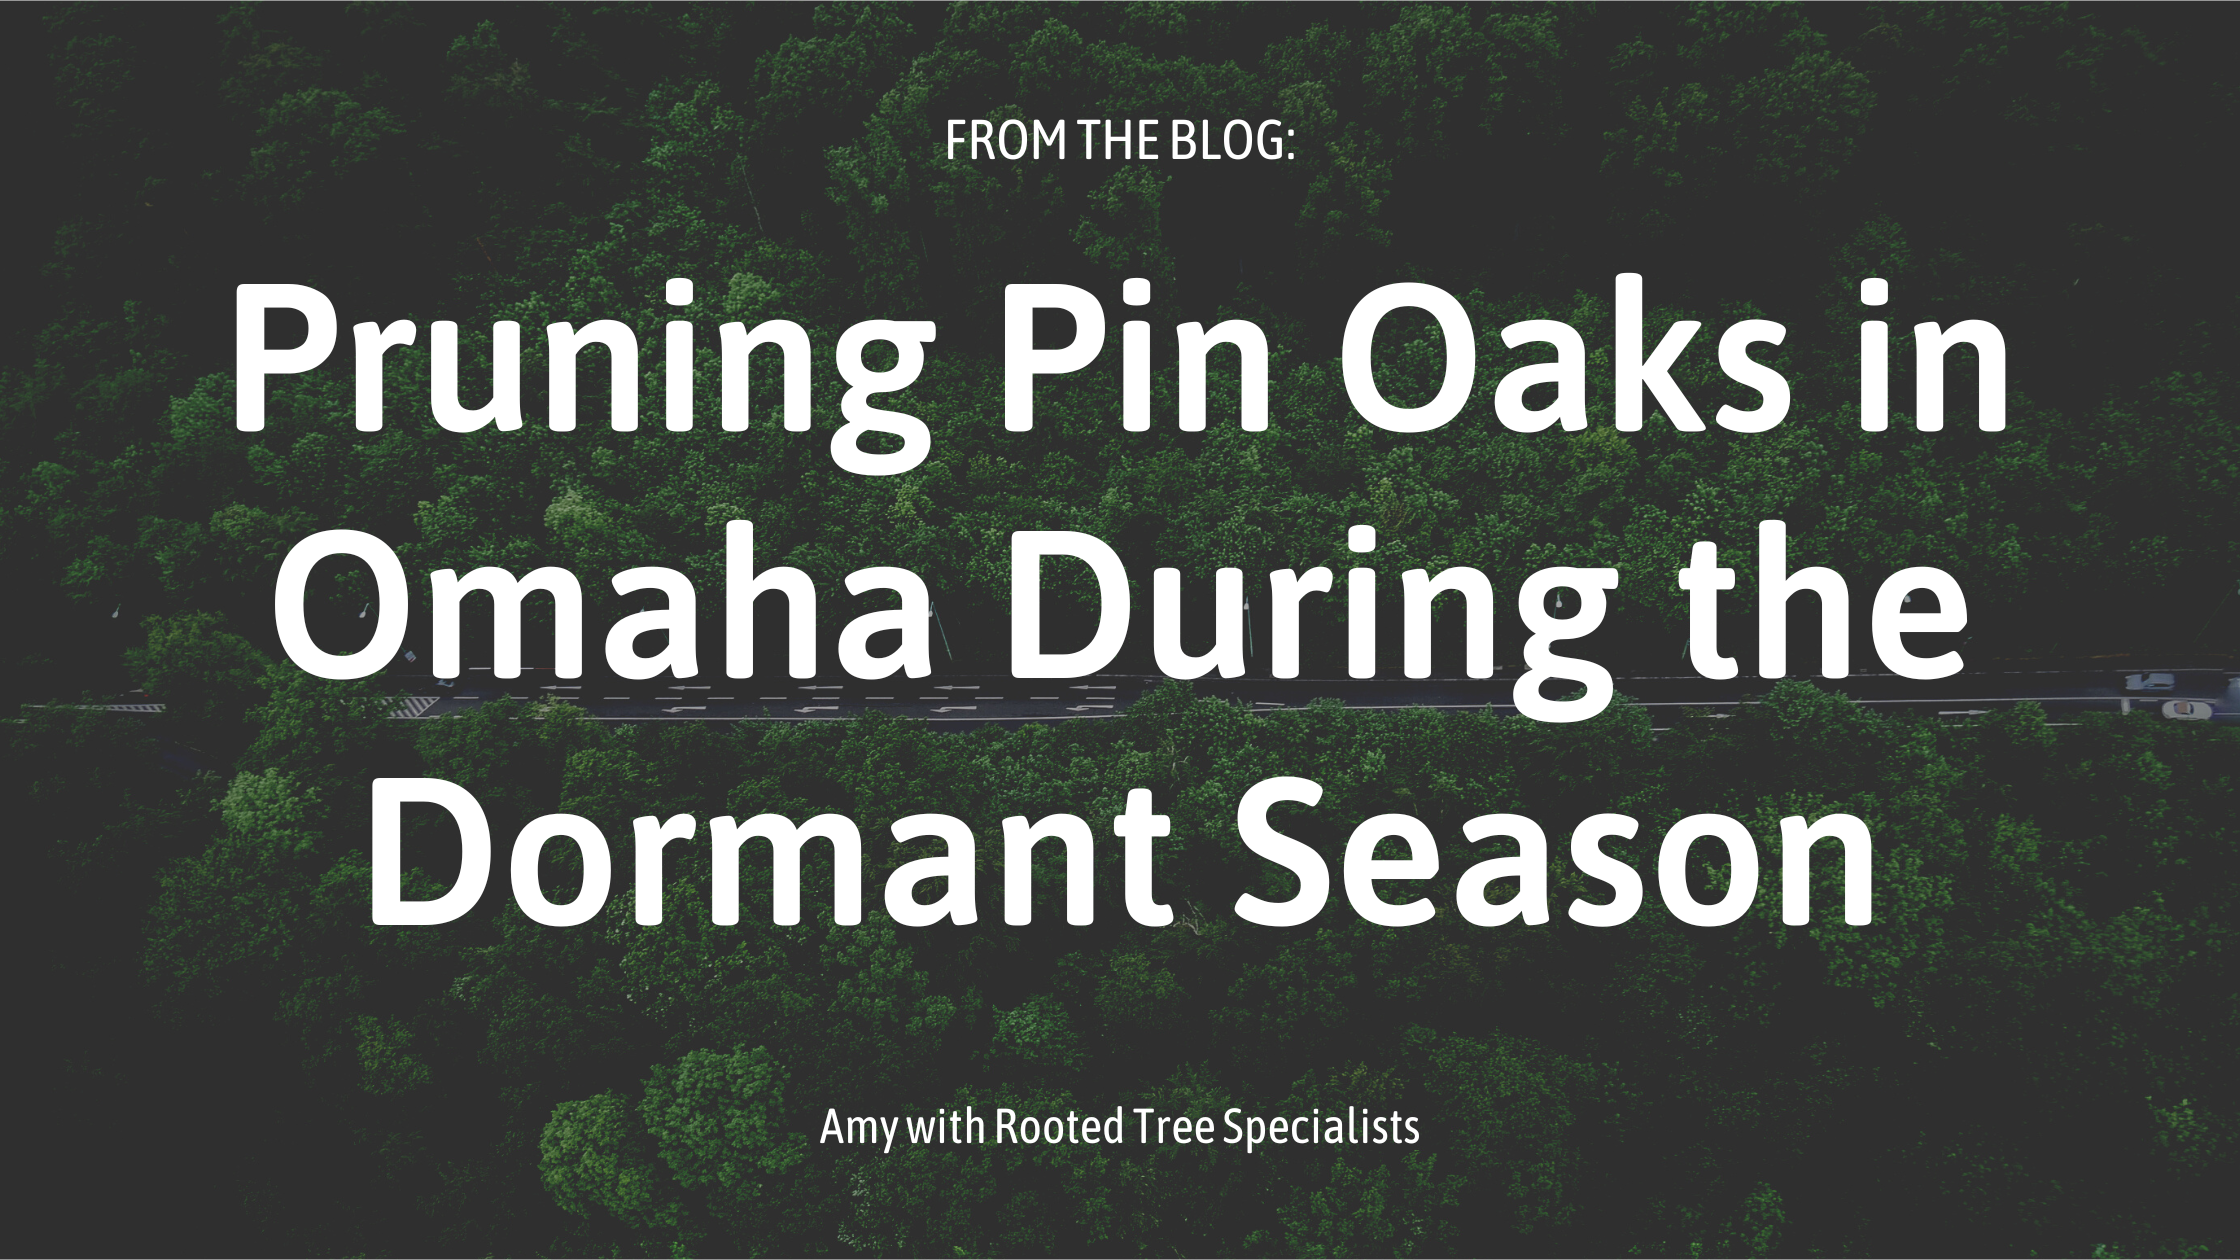 blog post cover image for rooted tree specialists entitled, "pruning pin oaks in omaha during the dormant season"